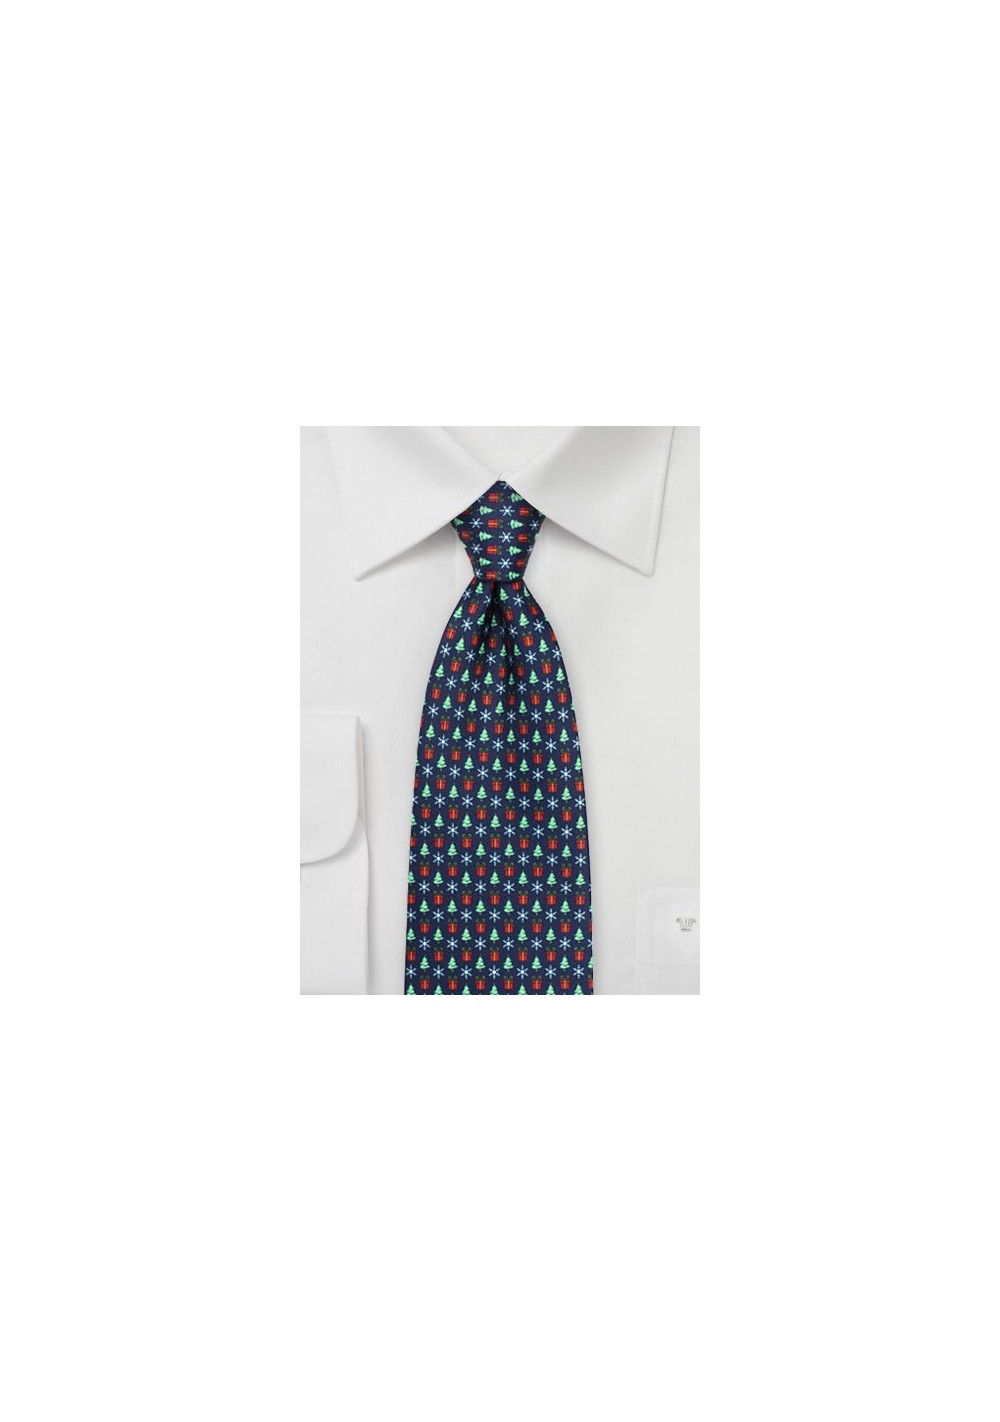 Holiday Tie with Trees, Presents, and Snowflakes in Navy